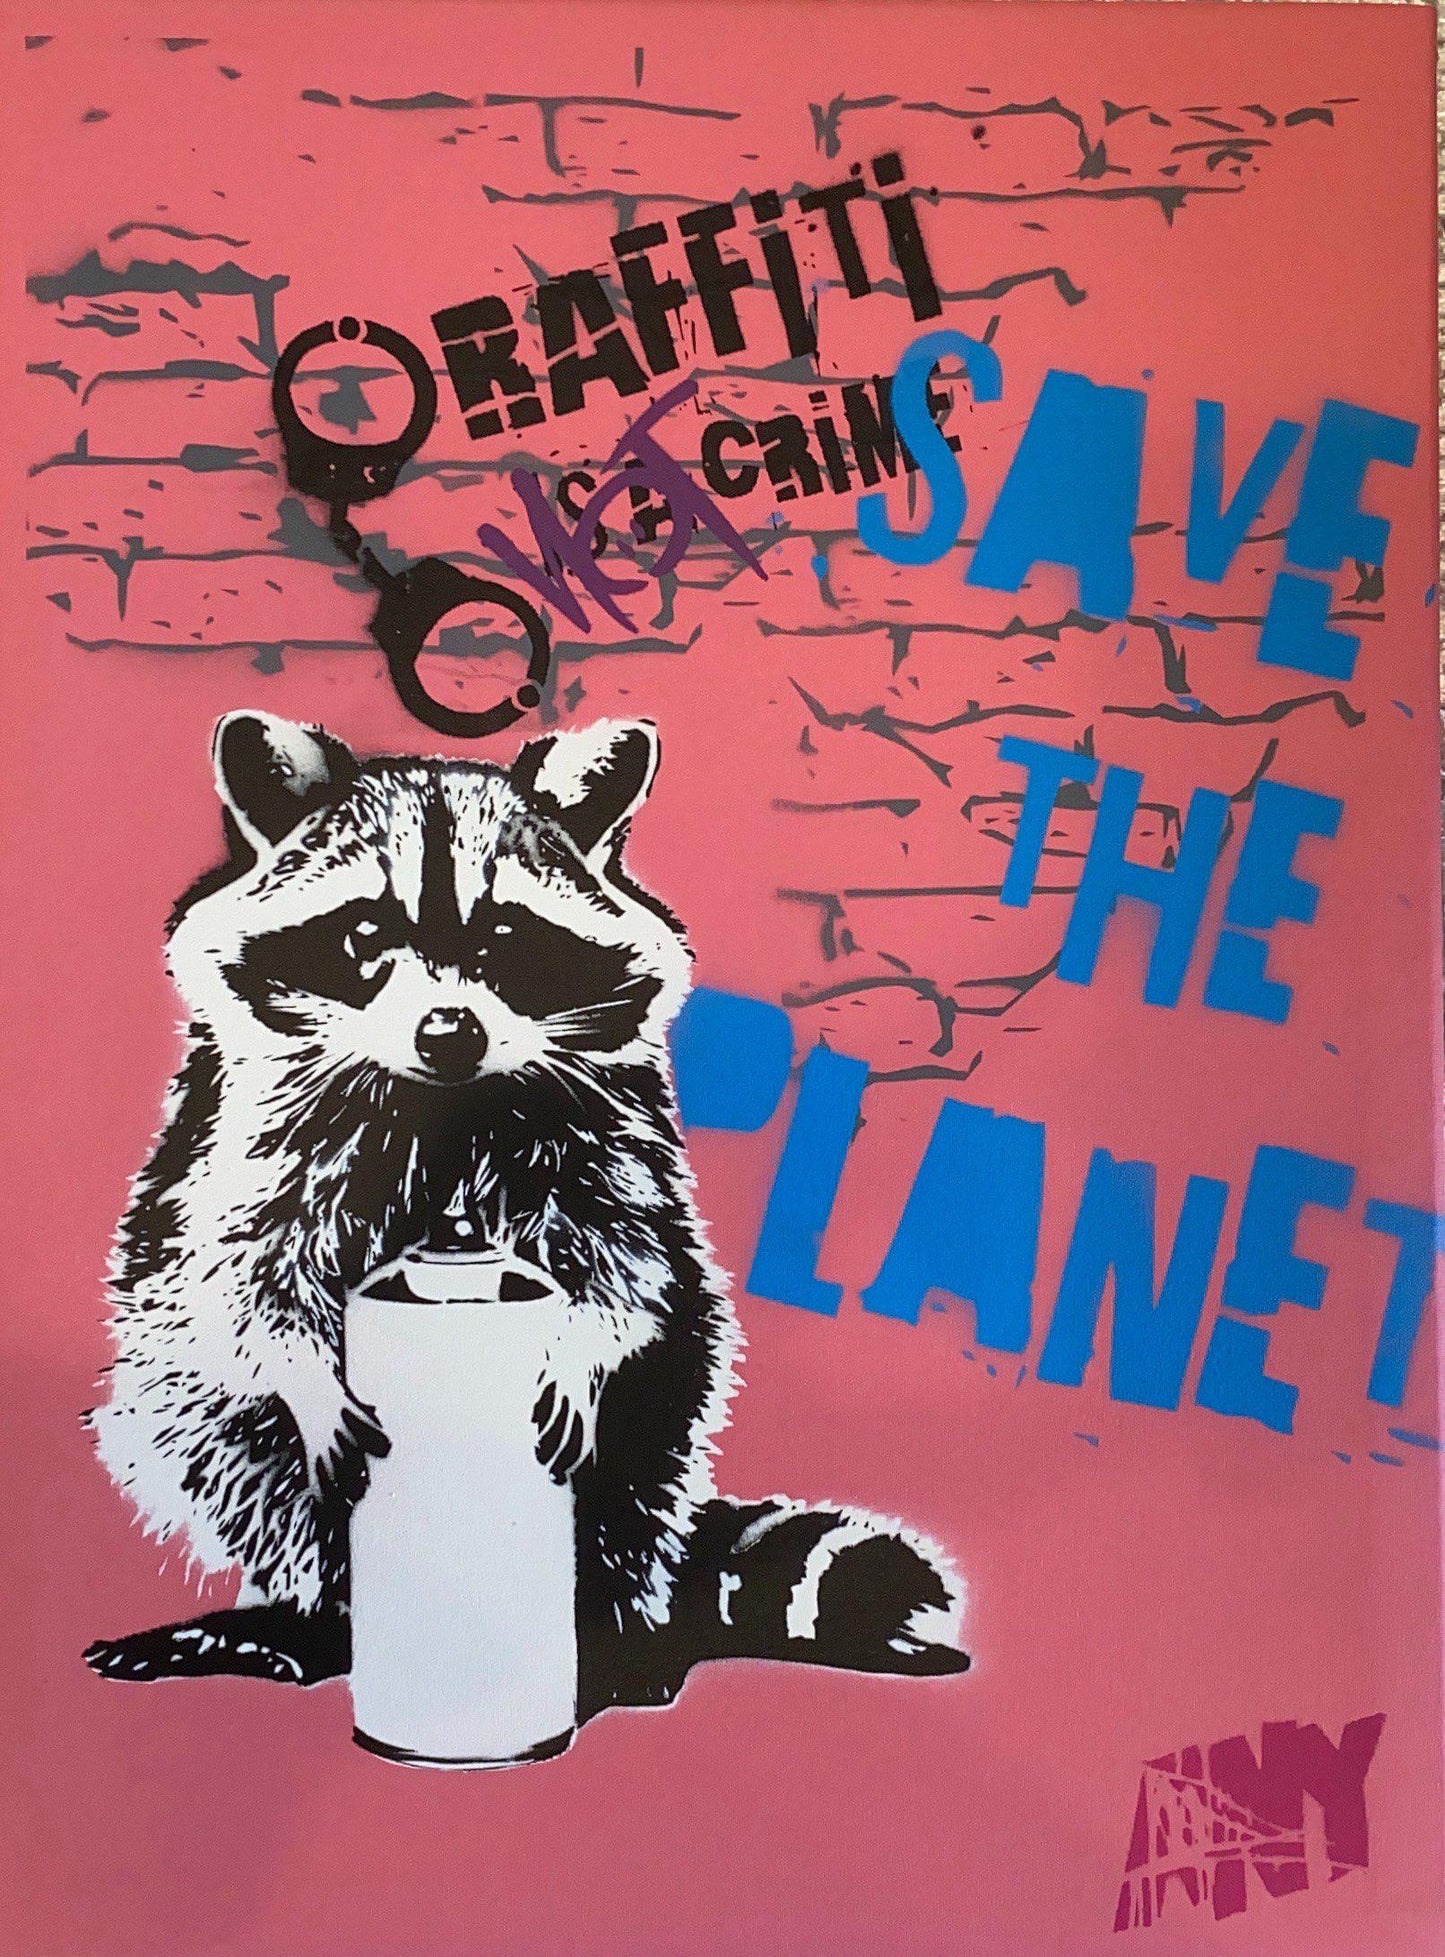 THE RULES OF RACOON graffiti edition